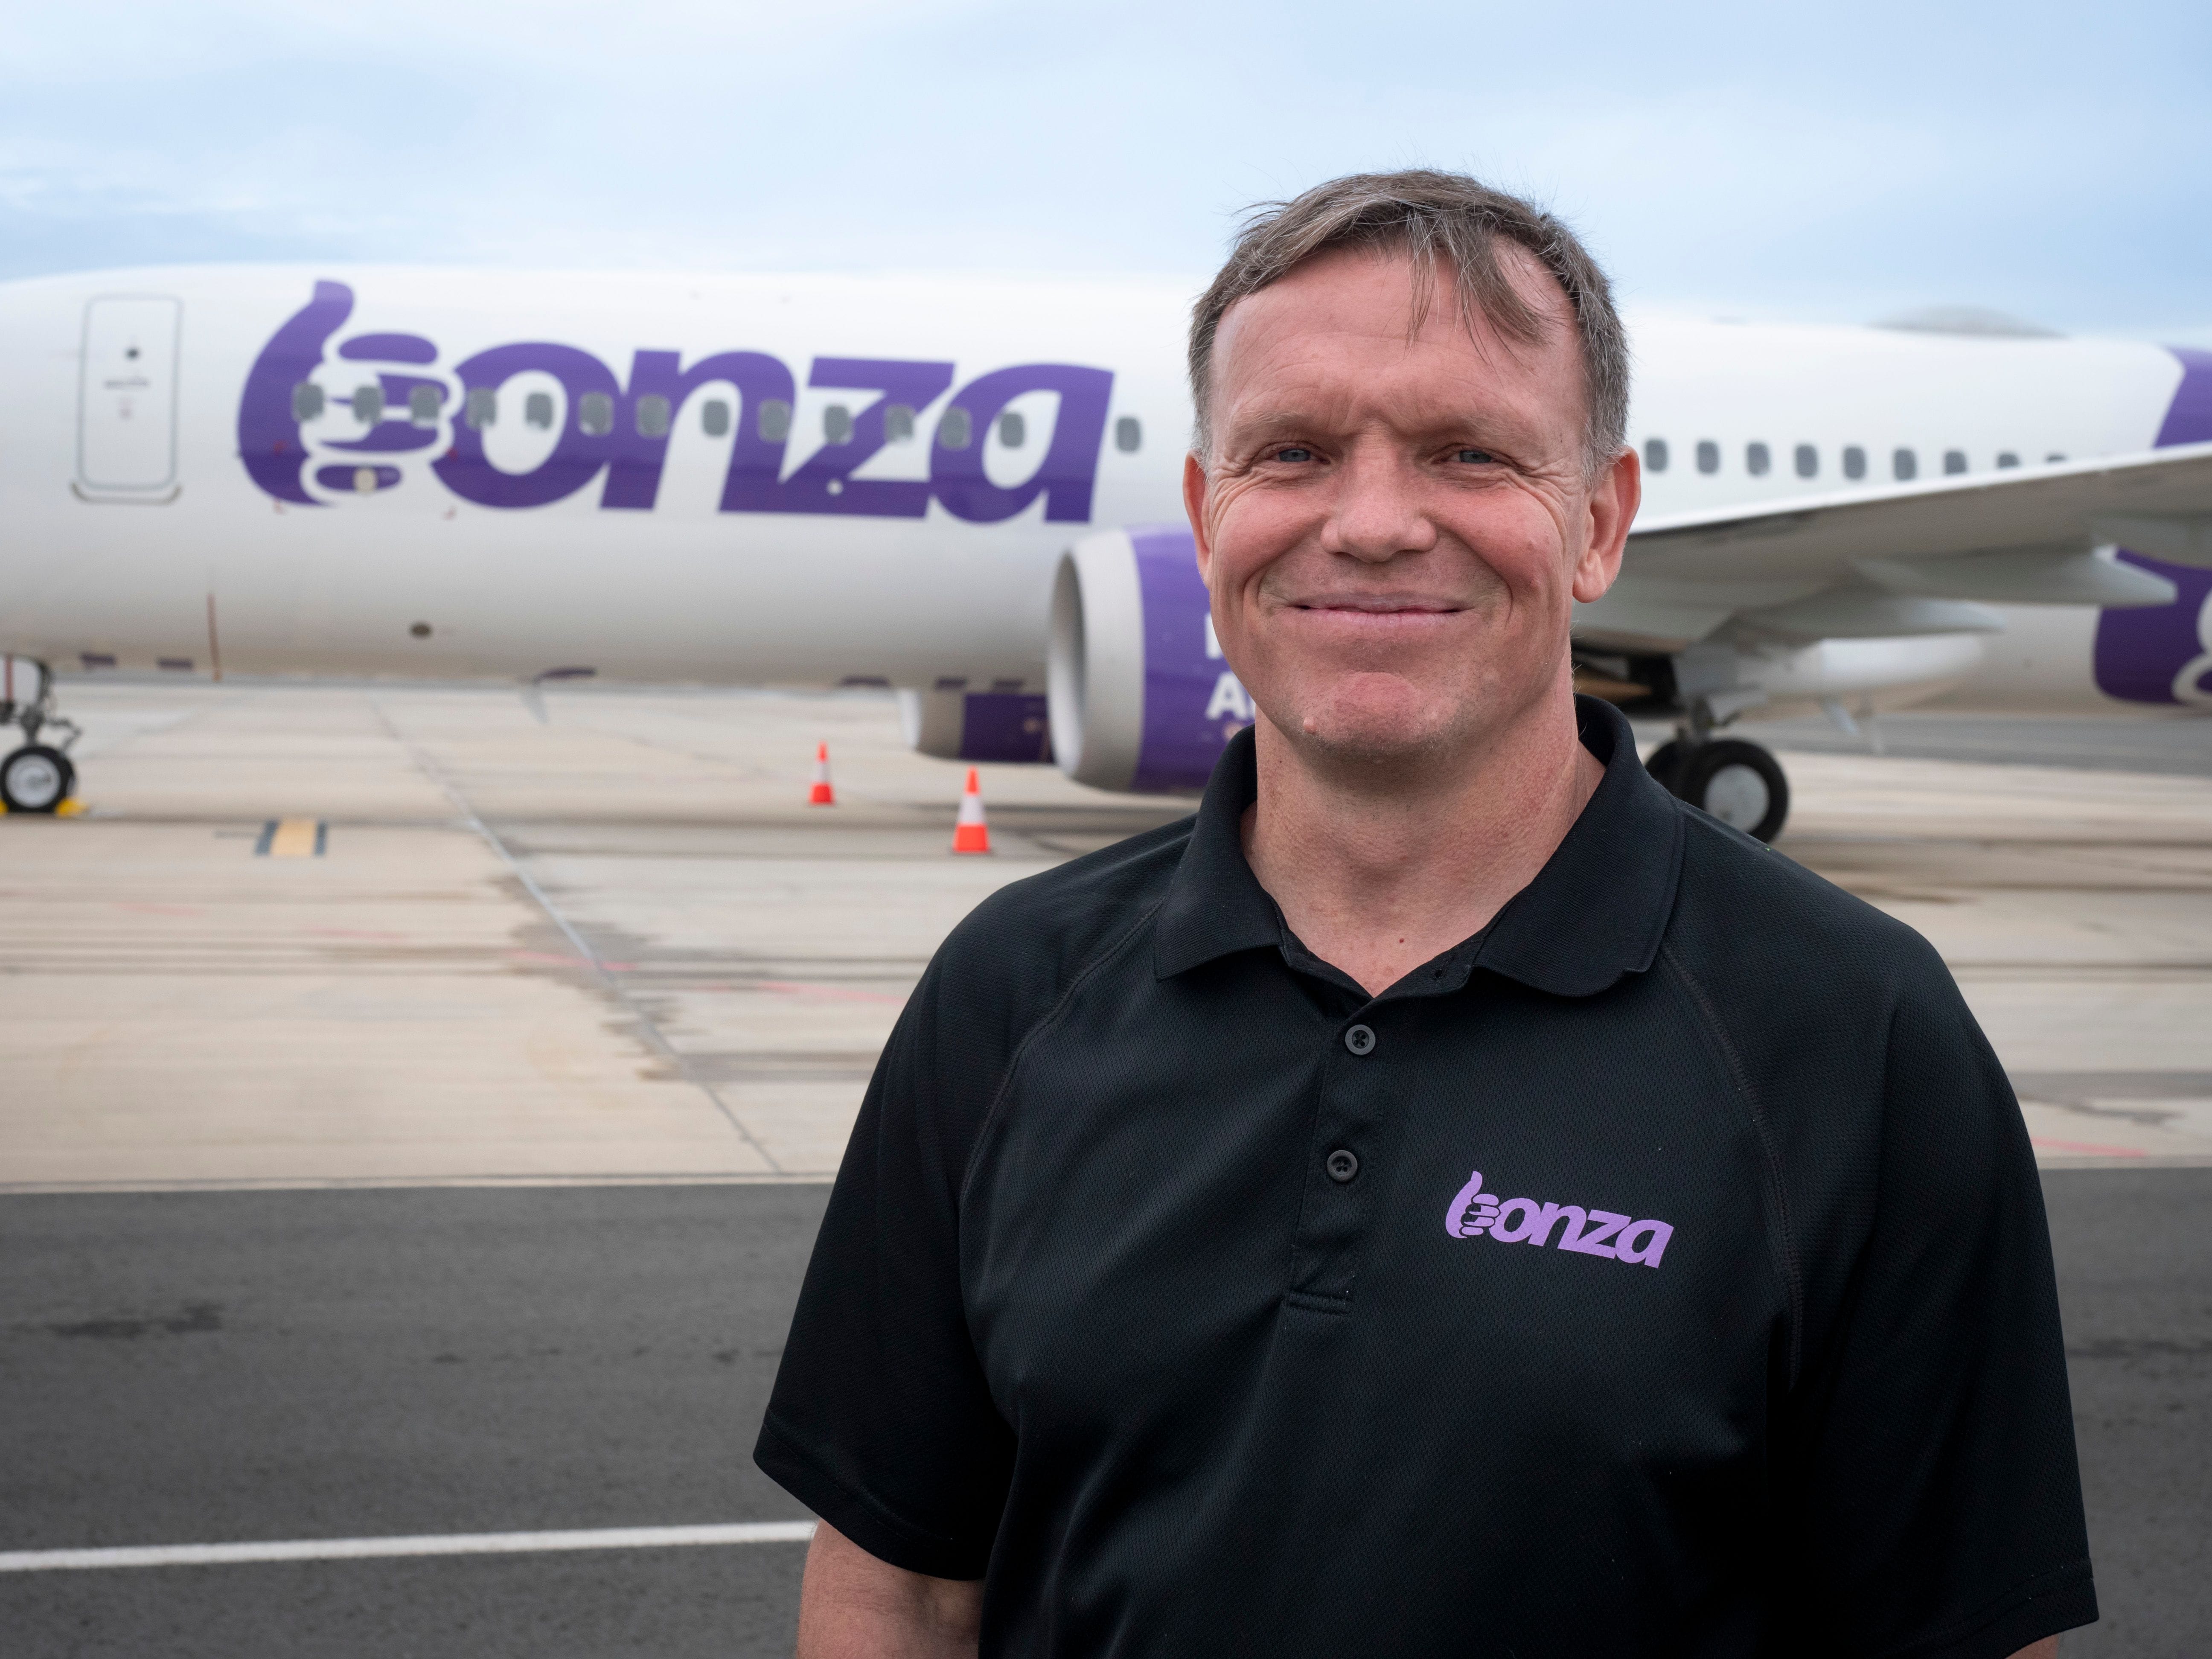 Bonza’s first flight heralds a new era in an increasingly crowded airspace